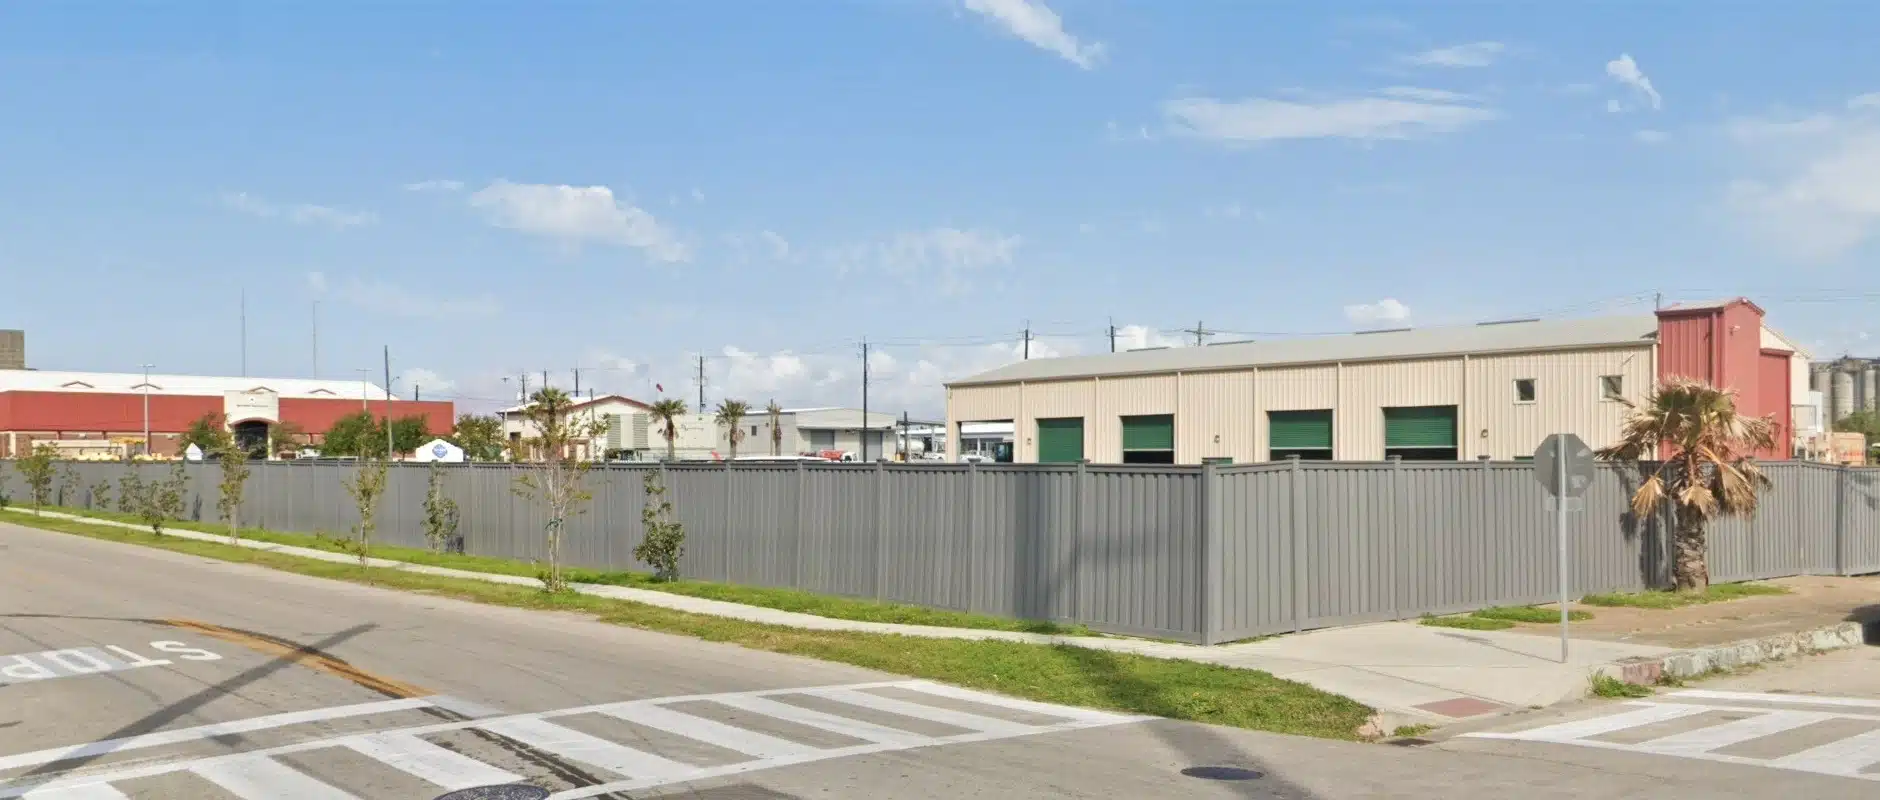 Commercial fencing for the perimeter around the Municipal Utility District (MUD) facility in Galveston TX. Built with Trex Seclusions Fencing.